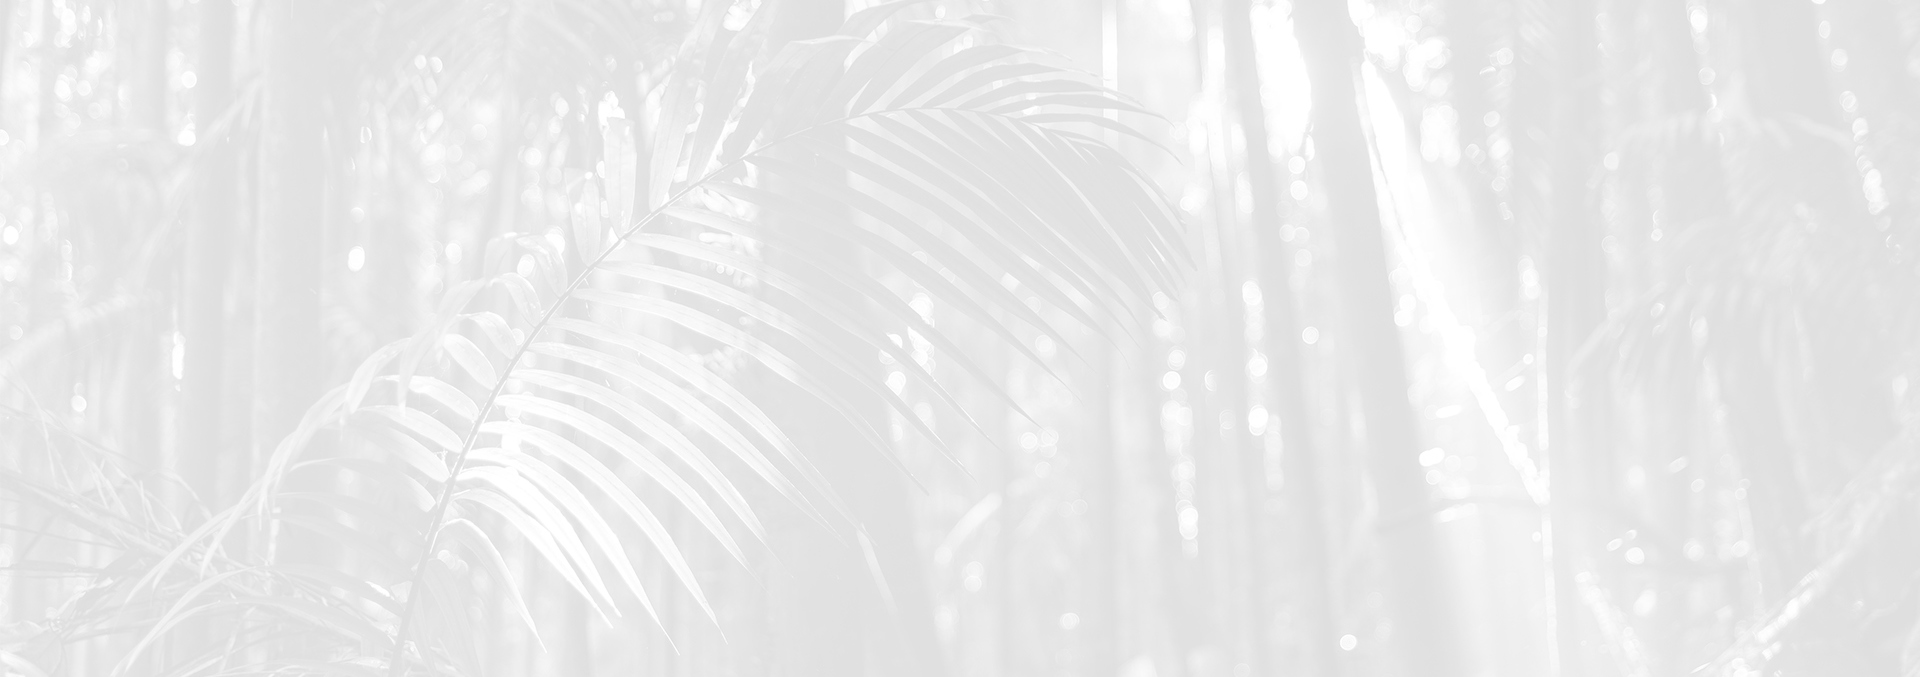 A light grey scale image of palm trees in a rainforest.